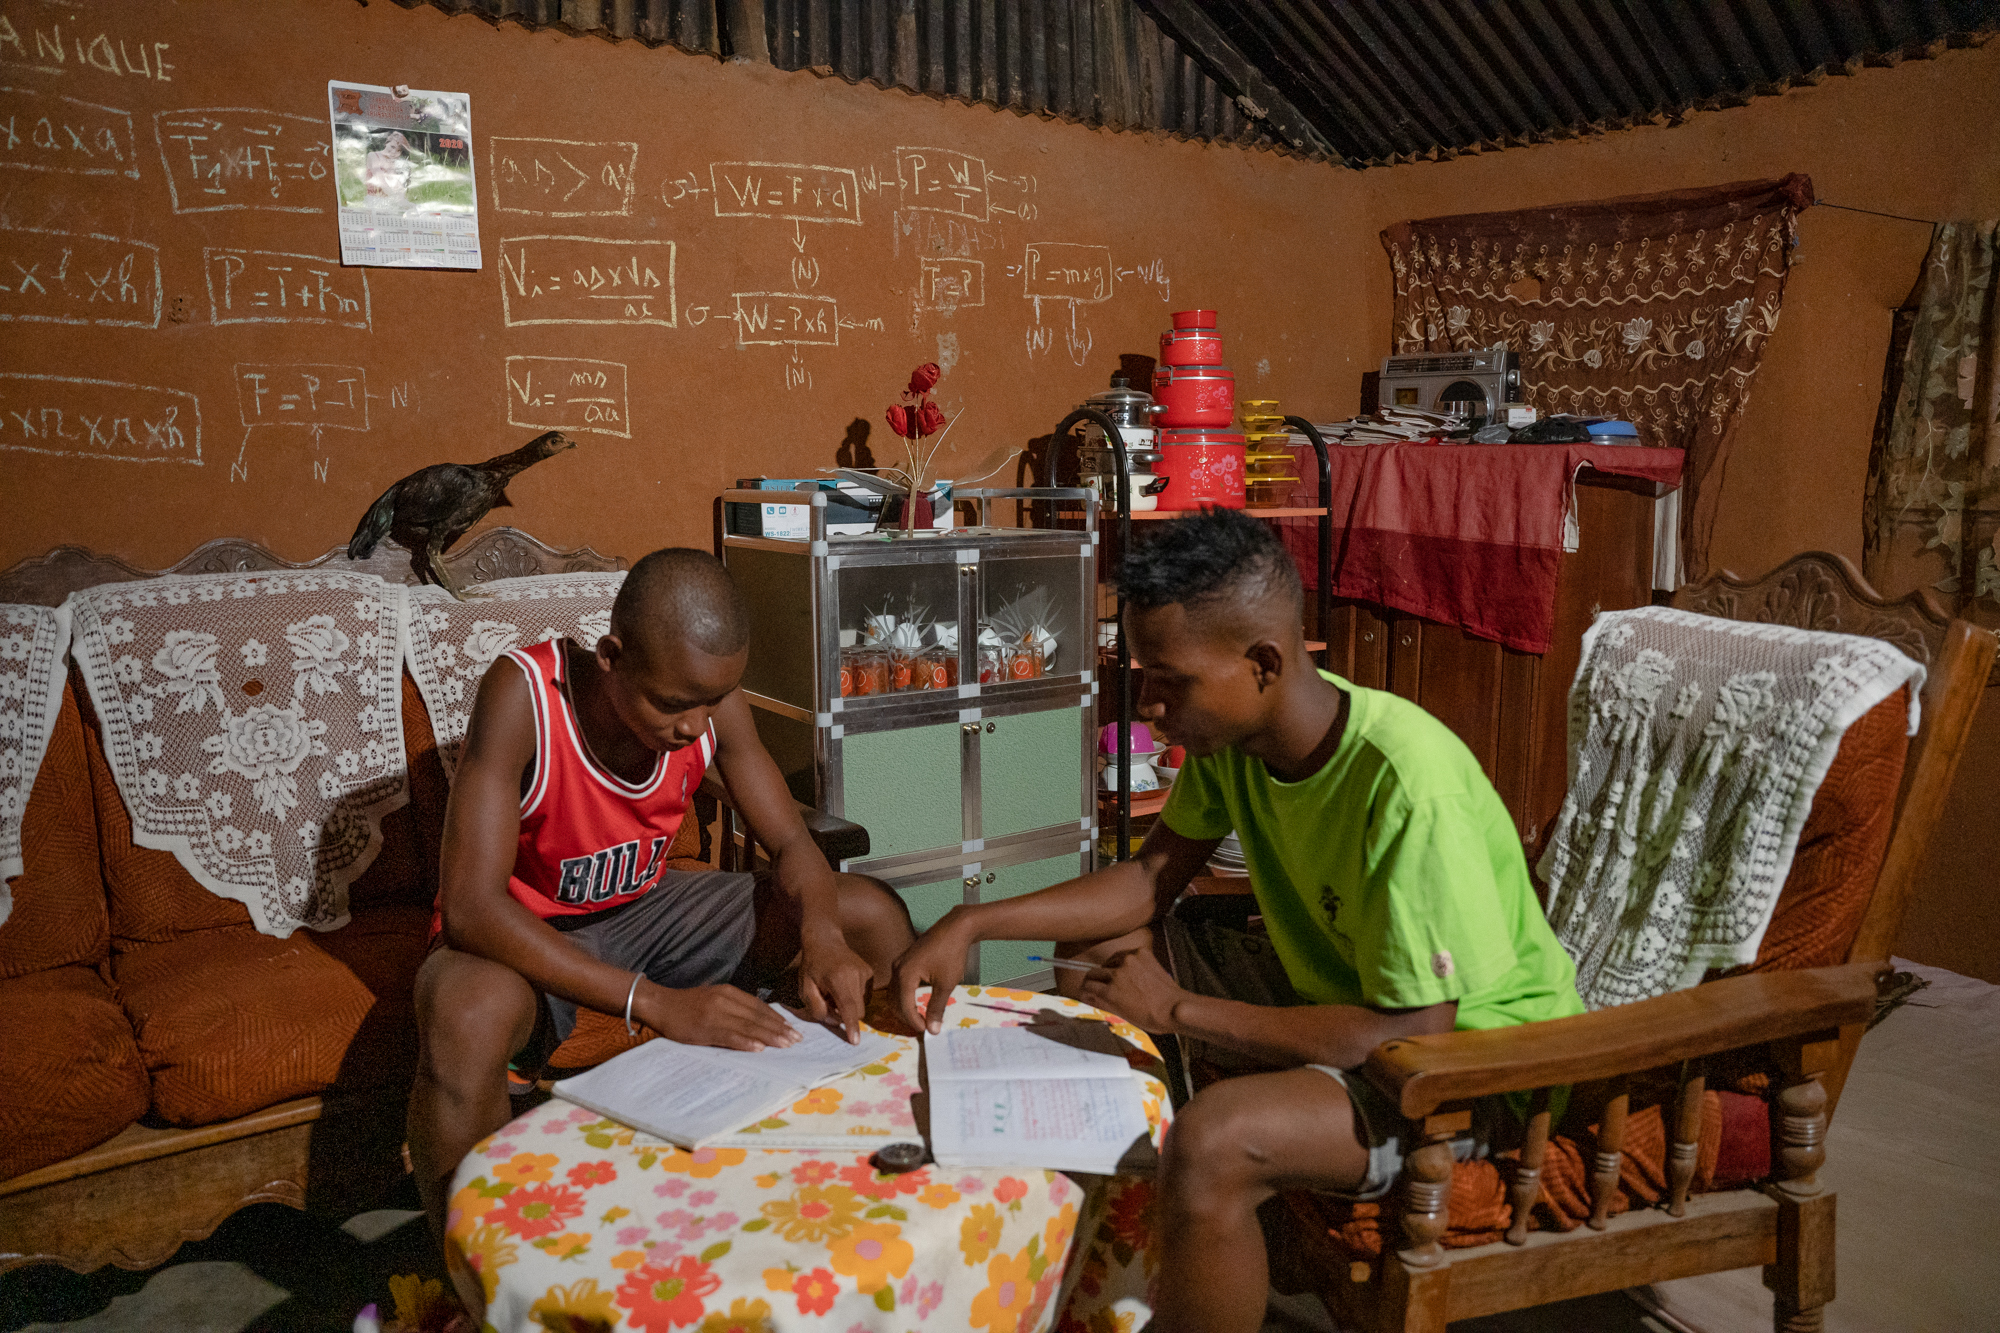 Tovondray and Lahininik, two young Malagasy study in their living room.